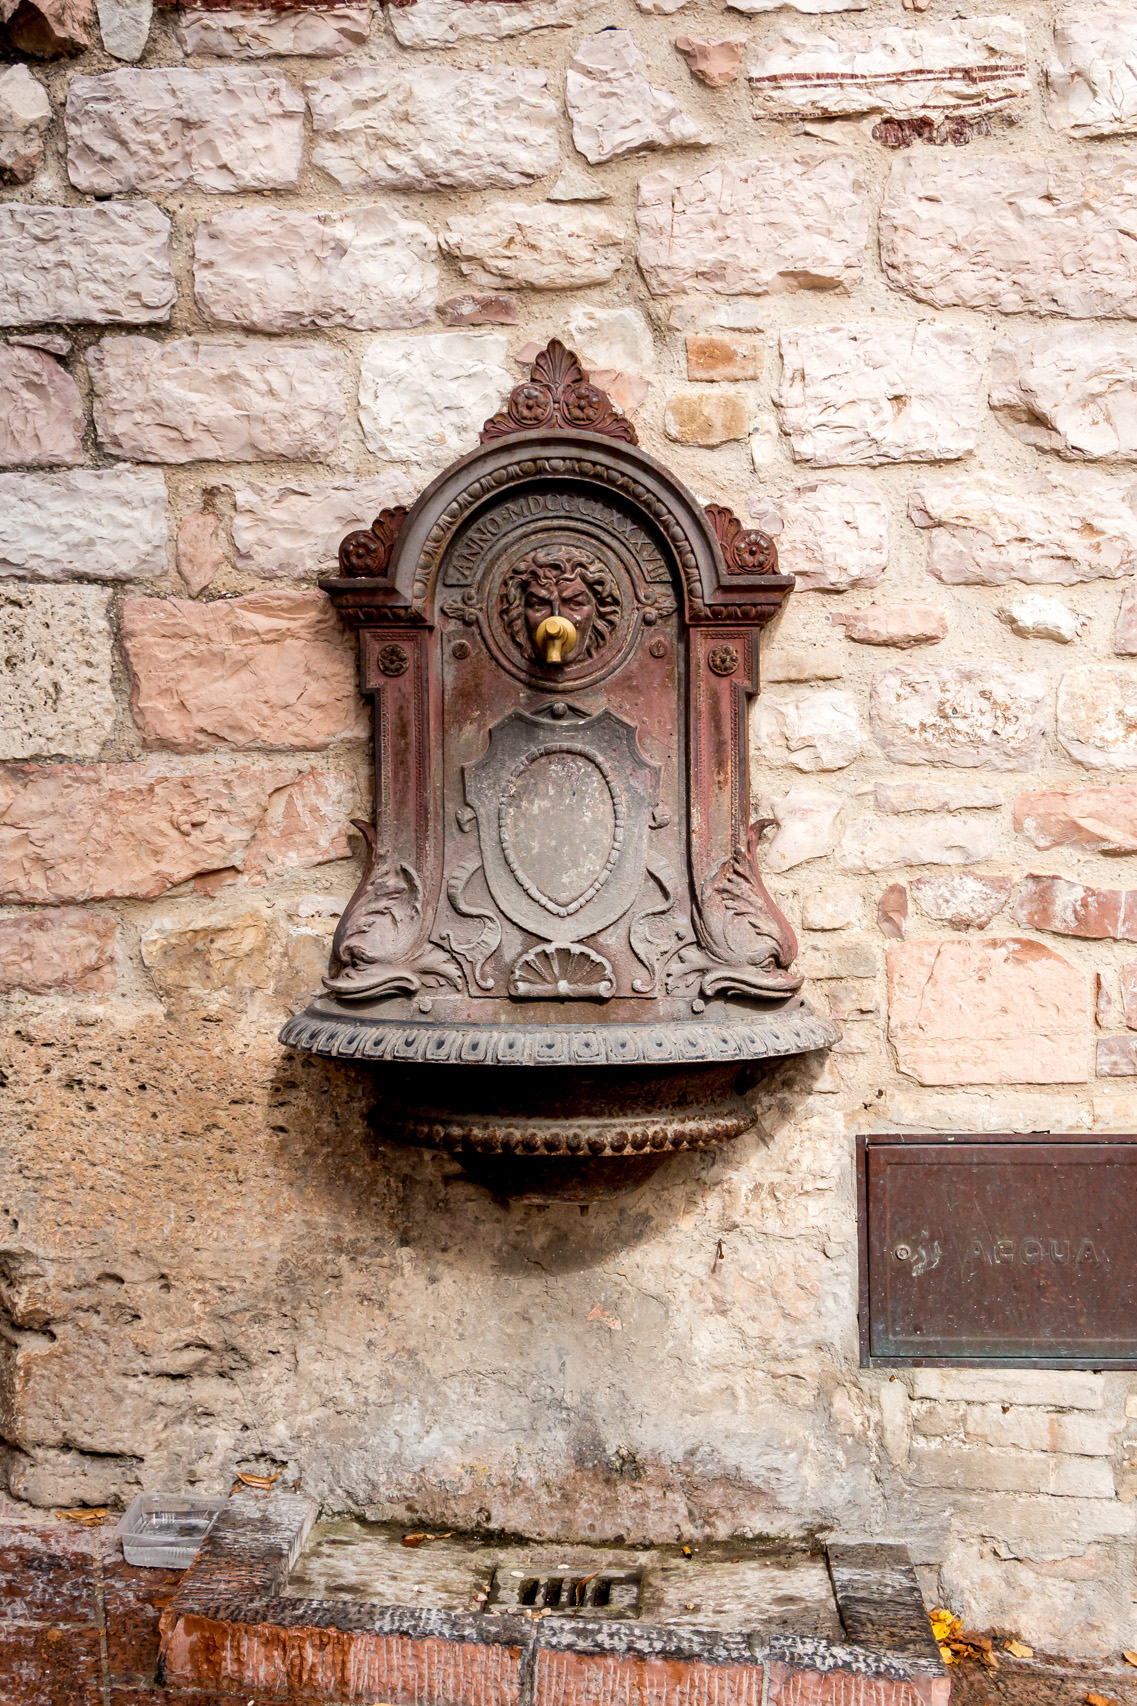 Water faucet in Assisi, Italy